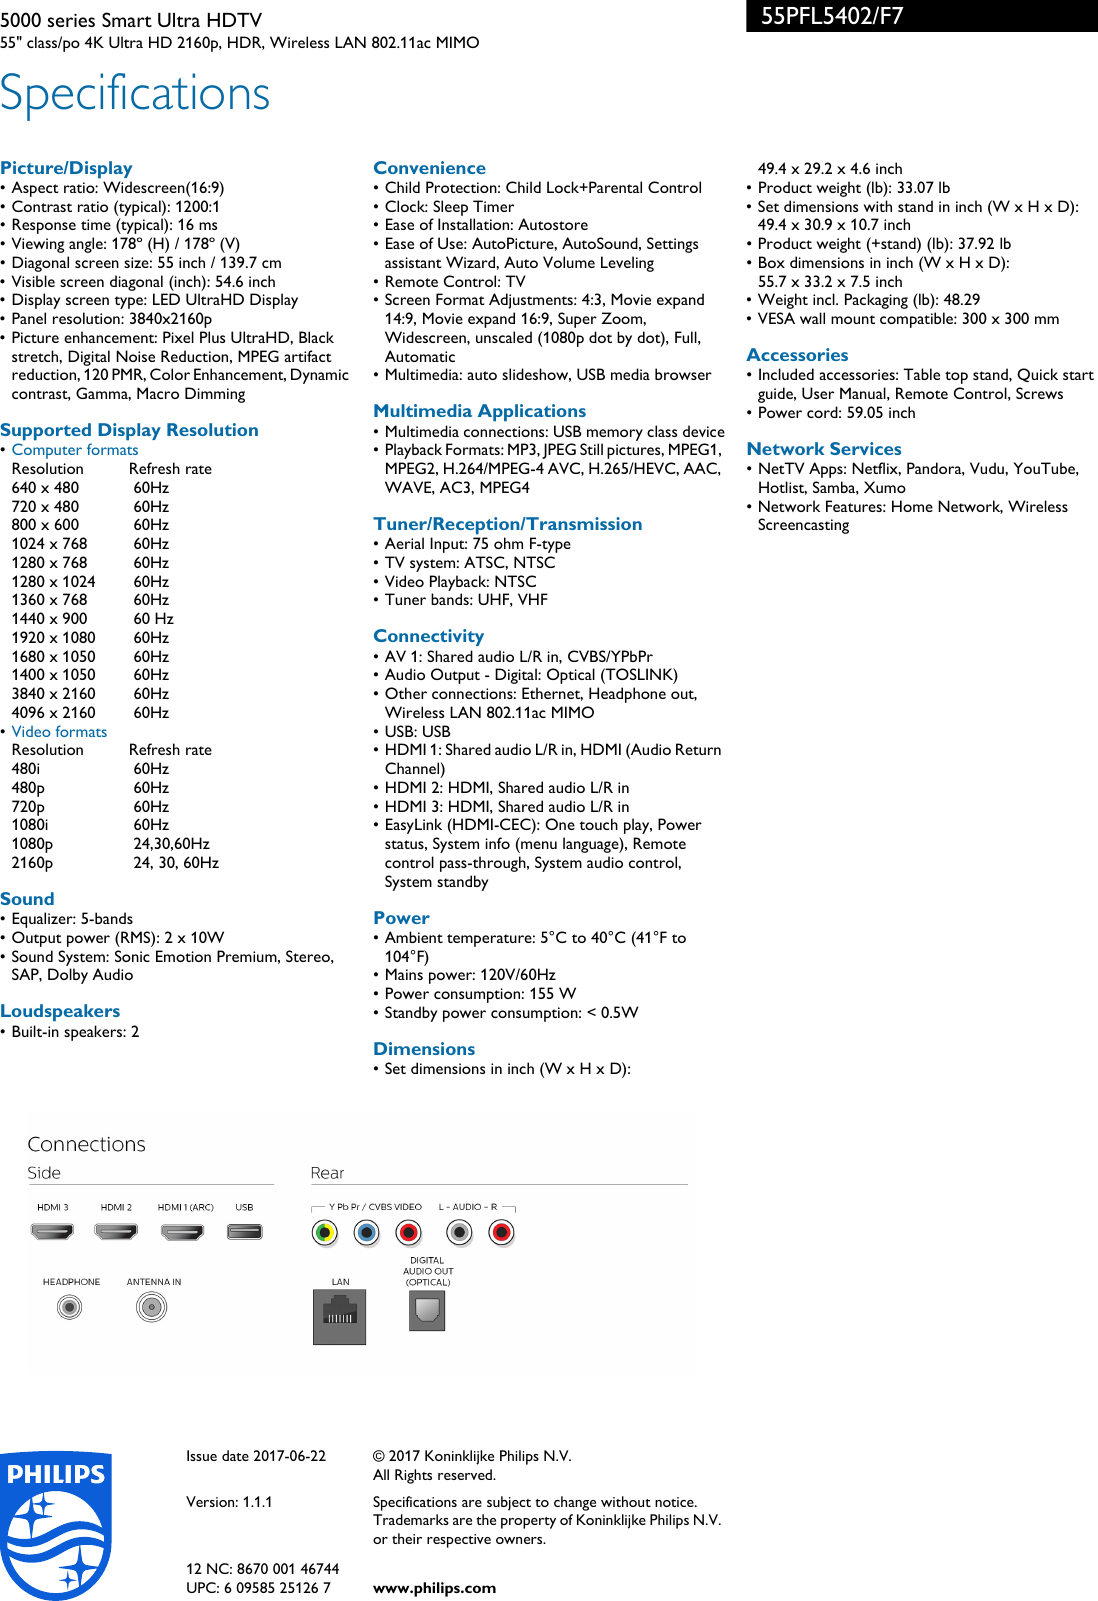 Page 3 of 3 - Philips 55PFL5402/F7 5000 Series Smart Ultra HDTV With NetTV And High Dynamic Range ... 55pfl5402 F7 Pss Aenca